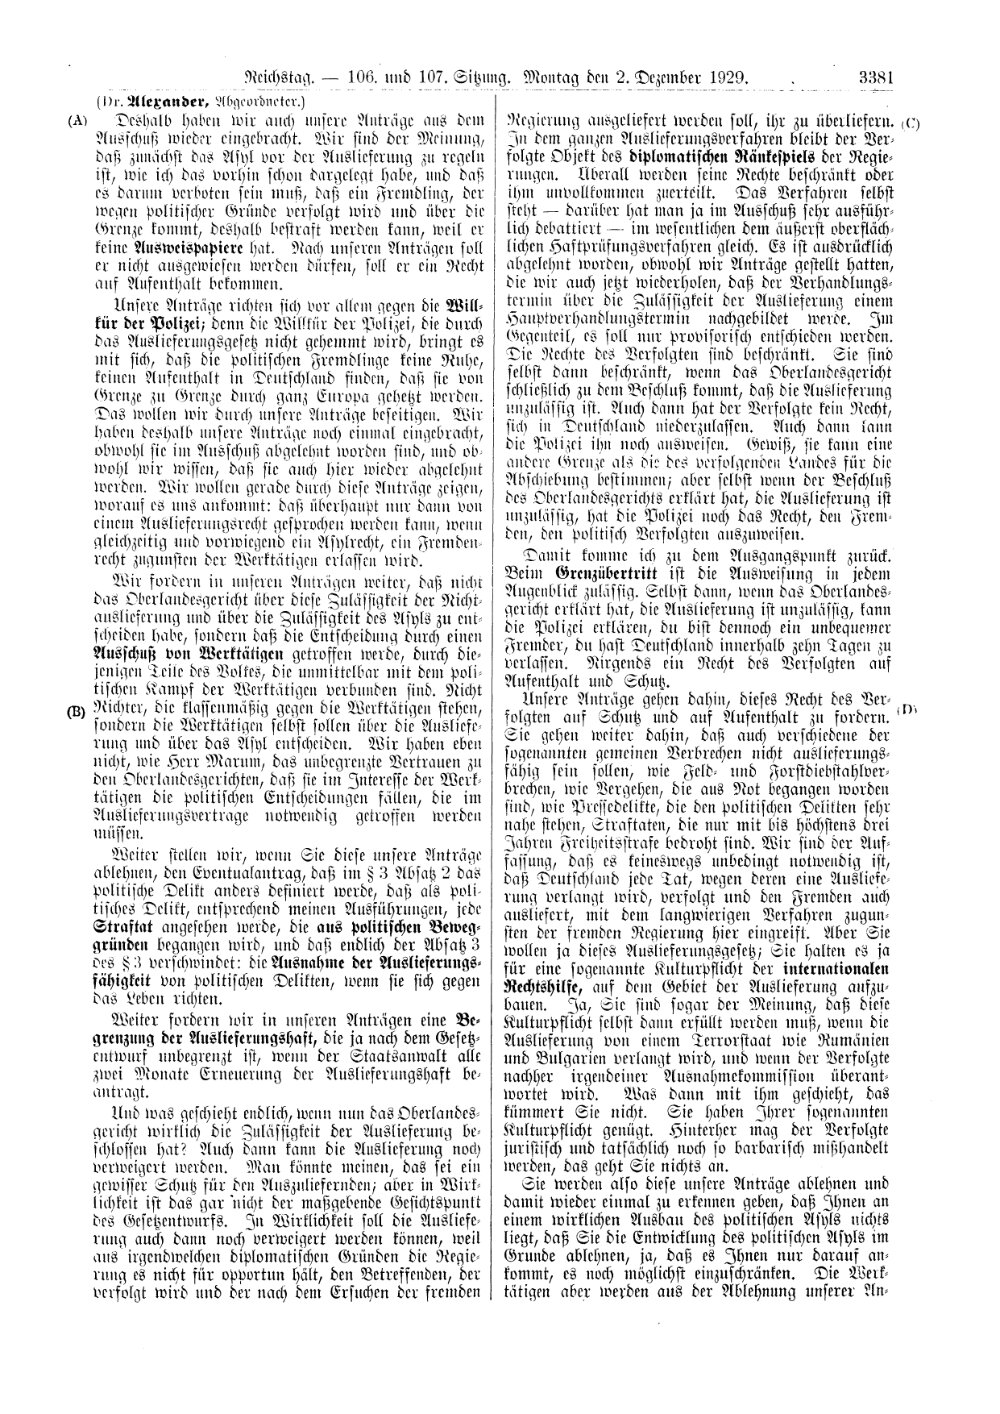 Scan of page 3381